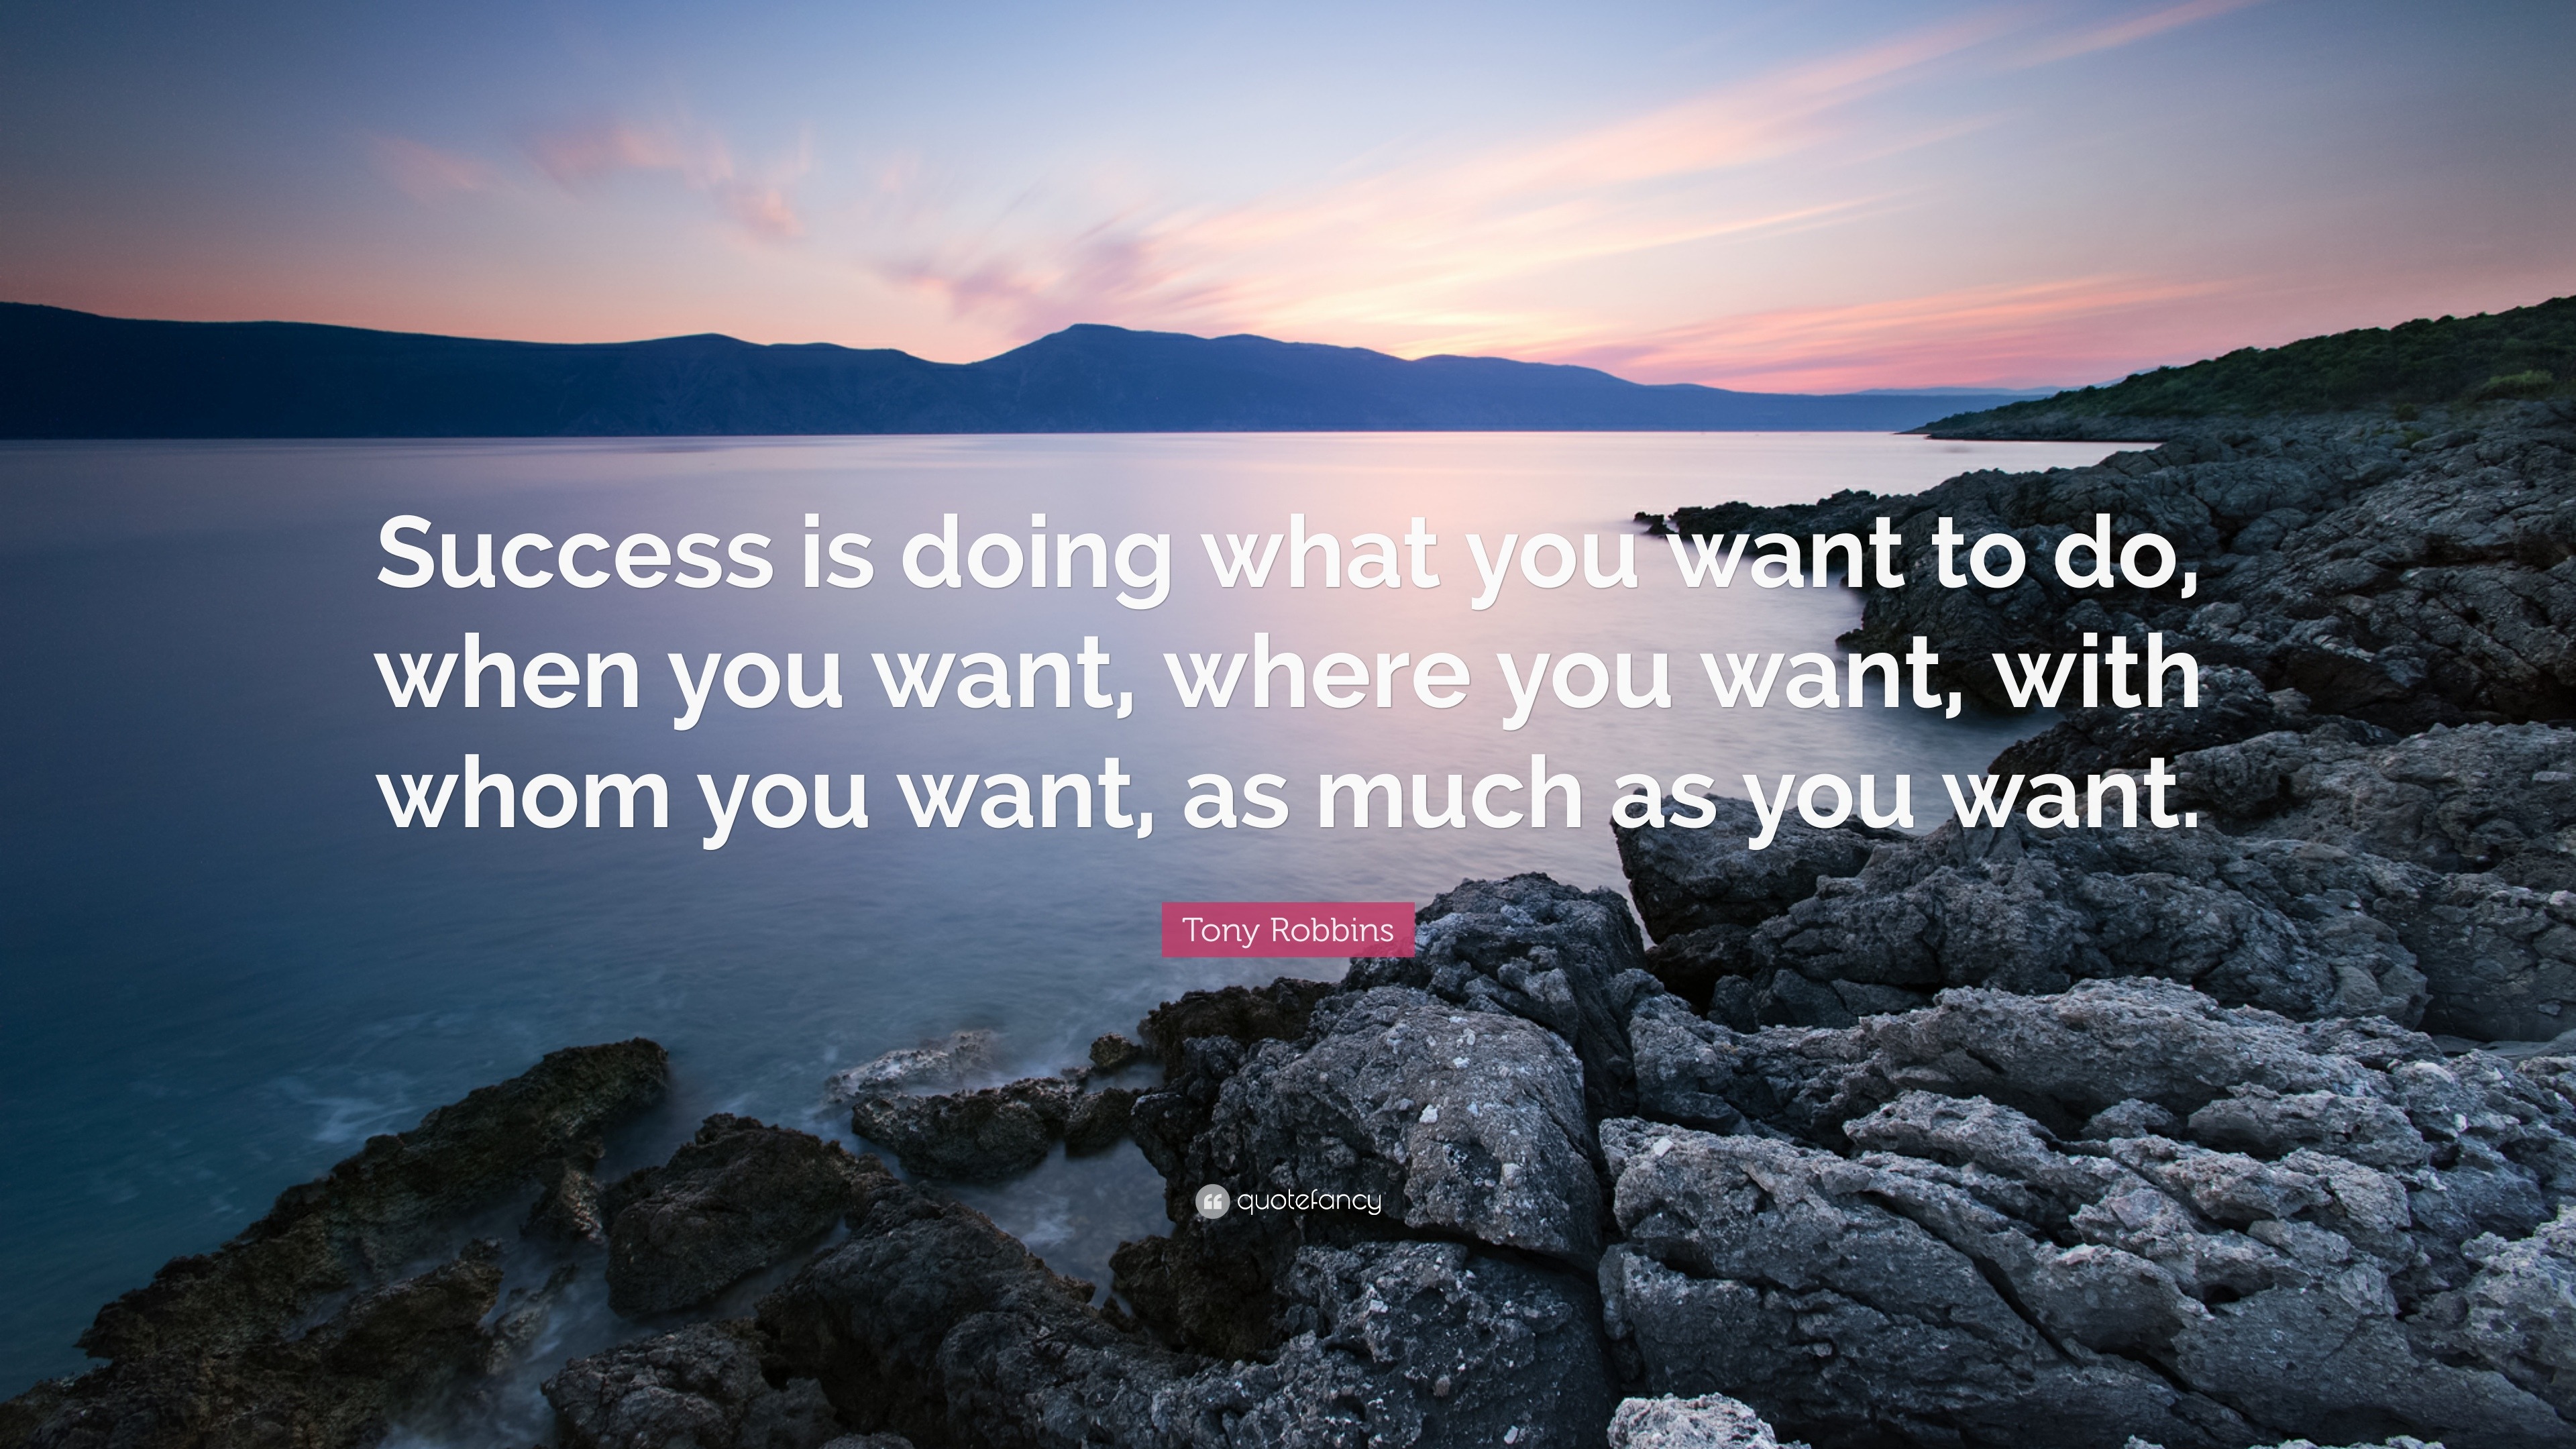 Tony Robbins Quote Success Is Doing What You Want To Do When You Want Where You